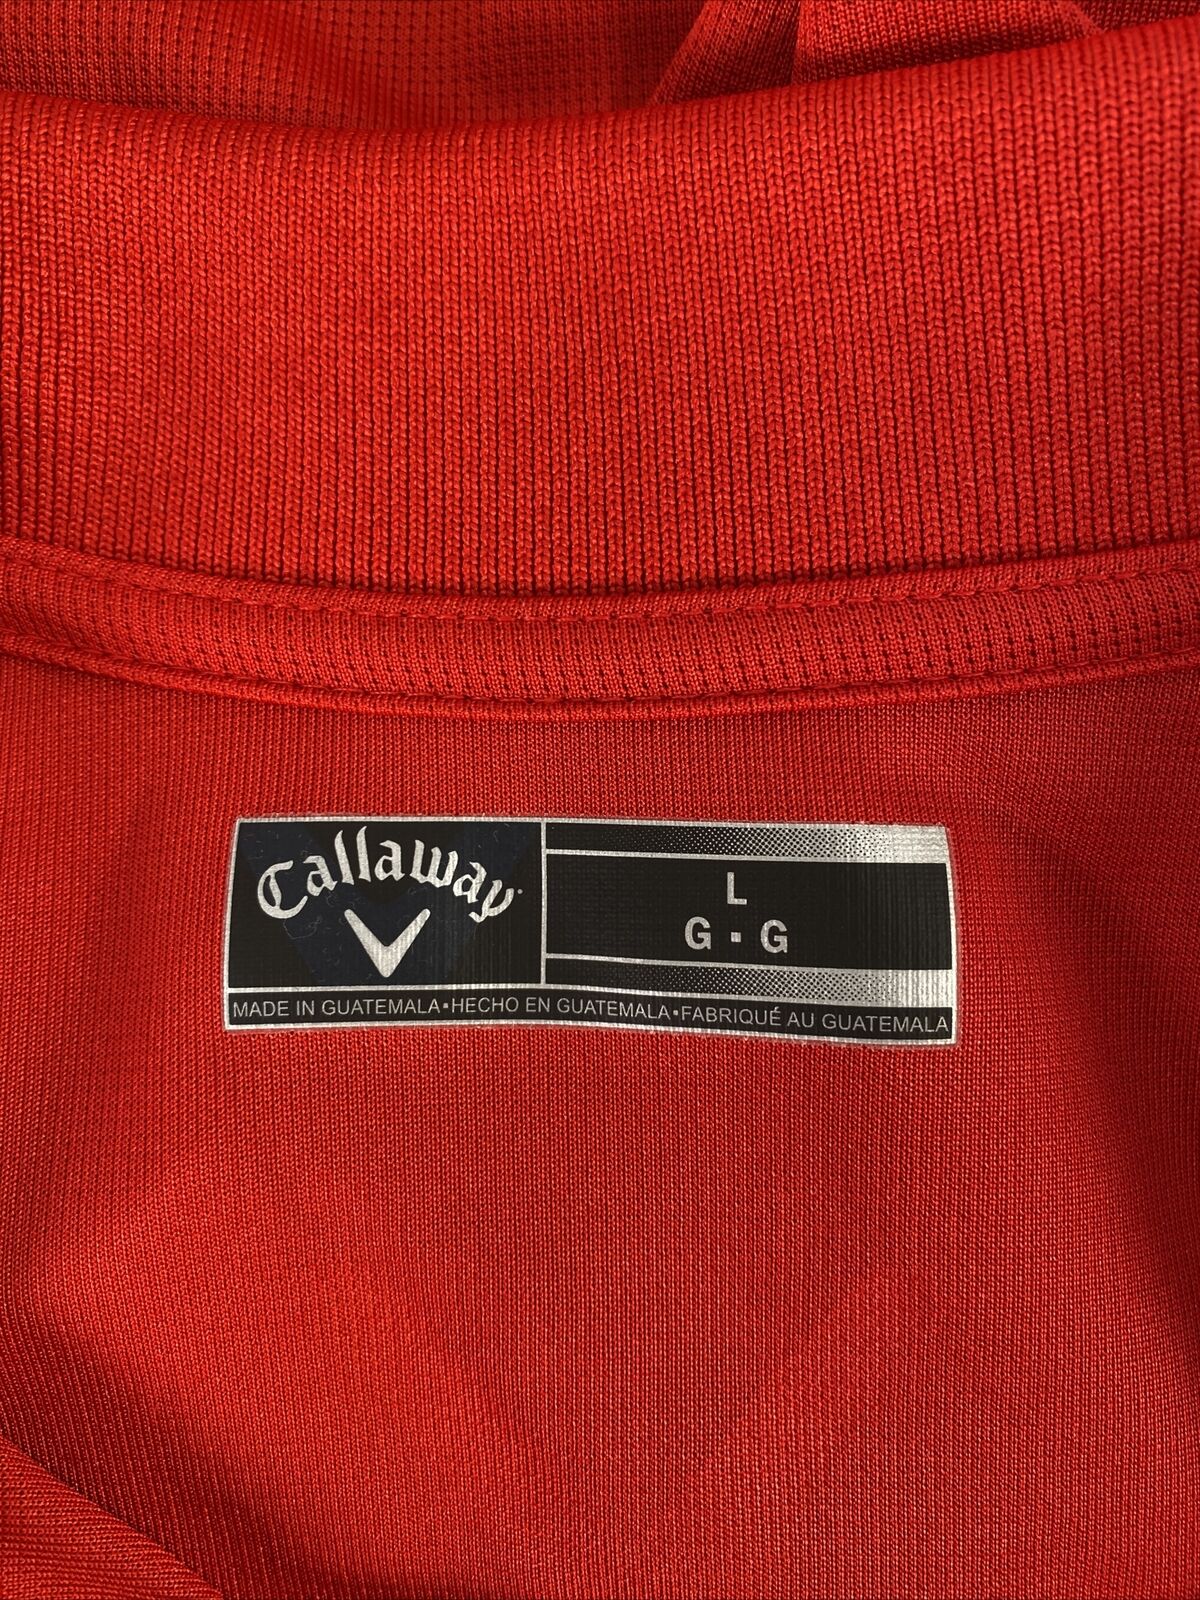 Callaway Men's Red Short Sleeve Athletic Golf Polo - L